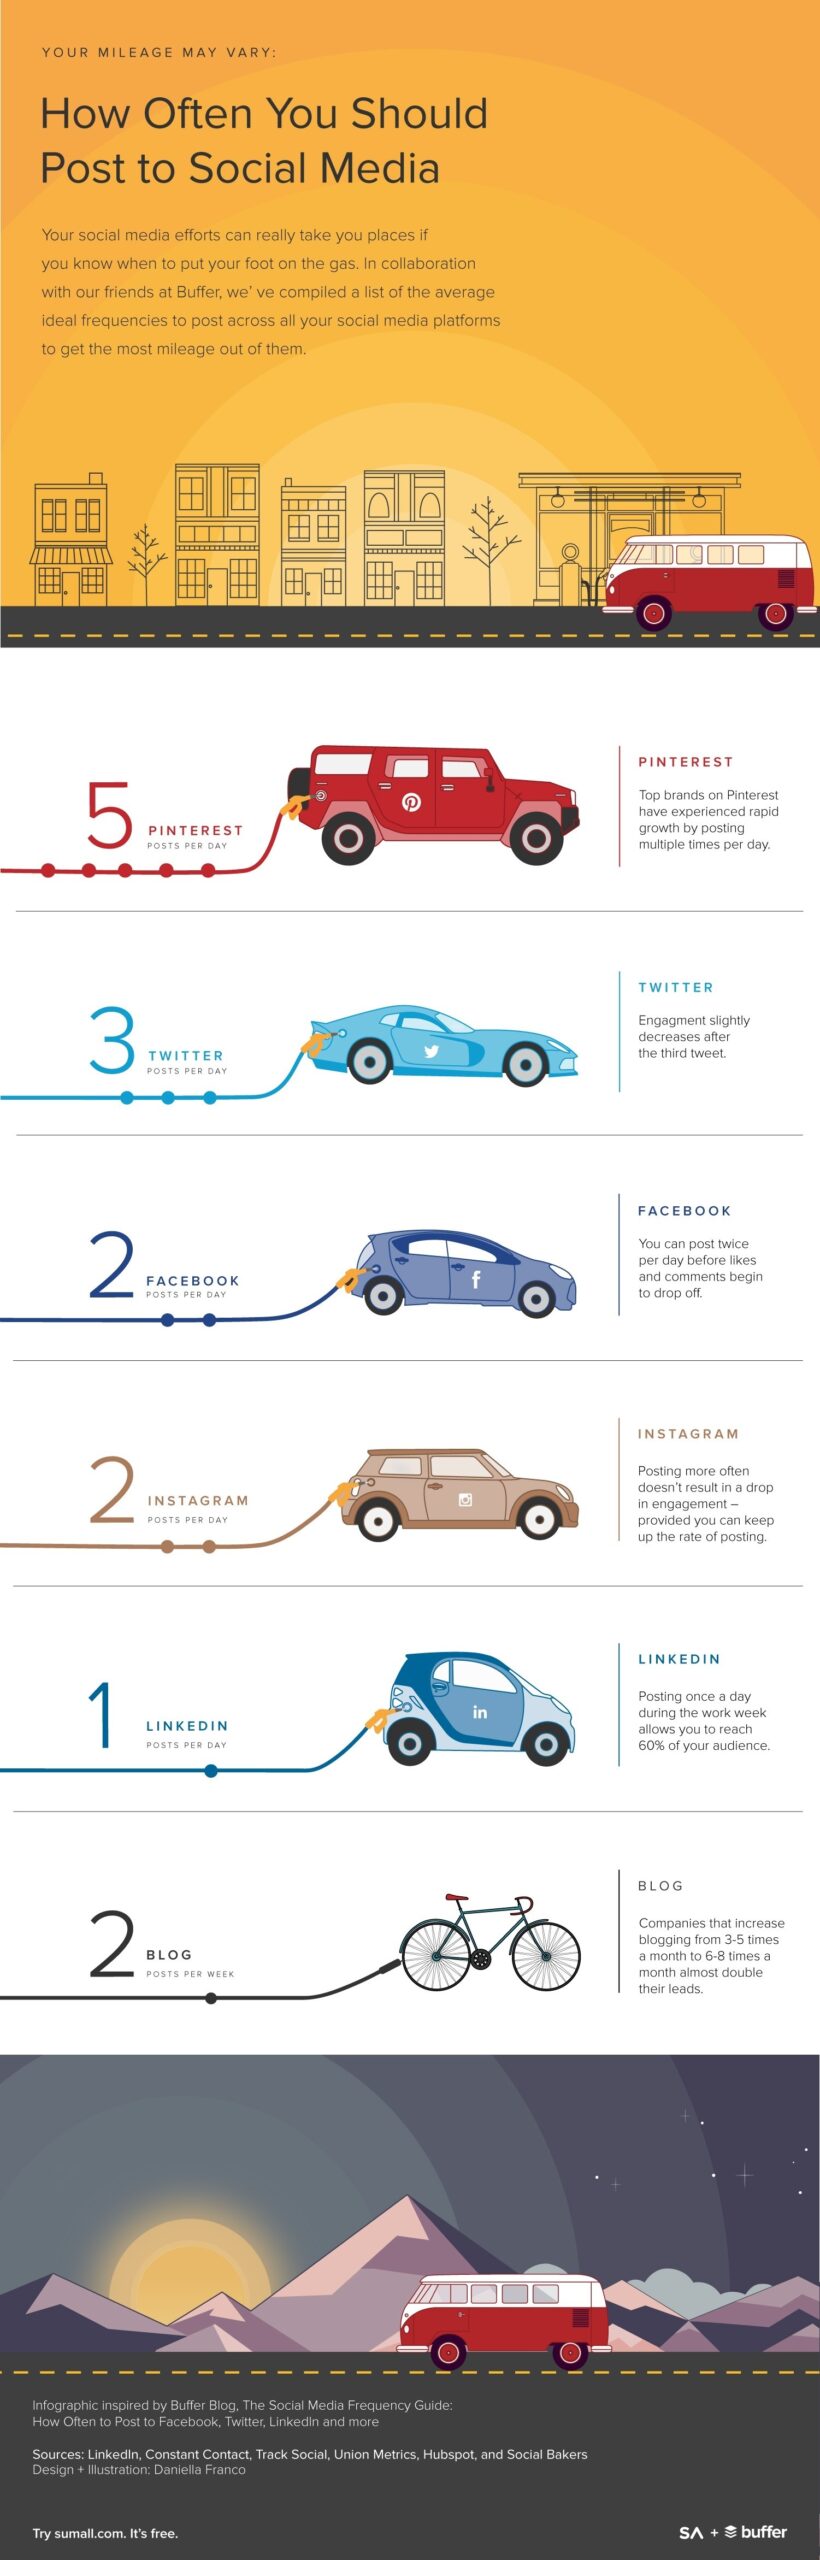 infographic-how-often-to-post-to social